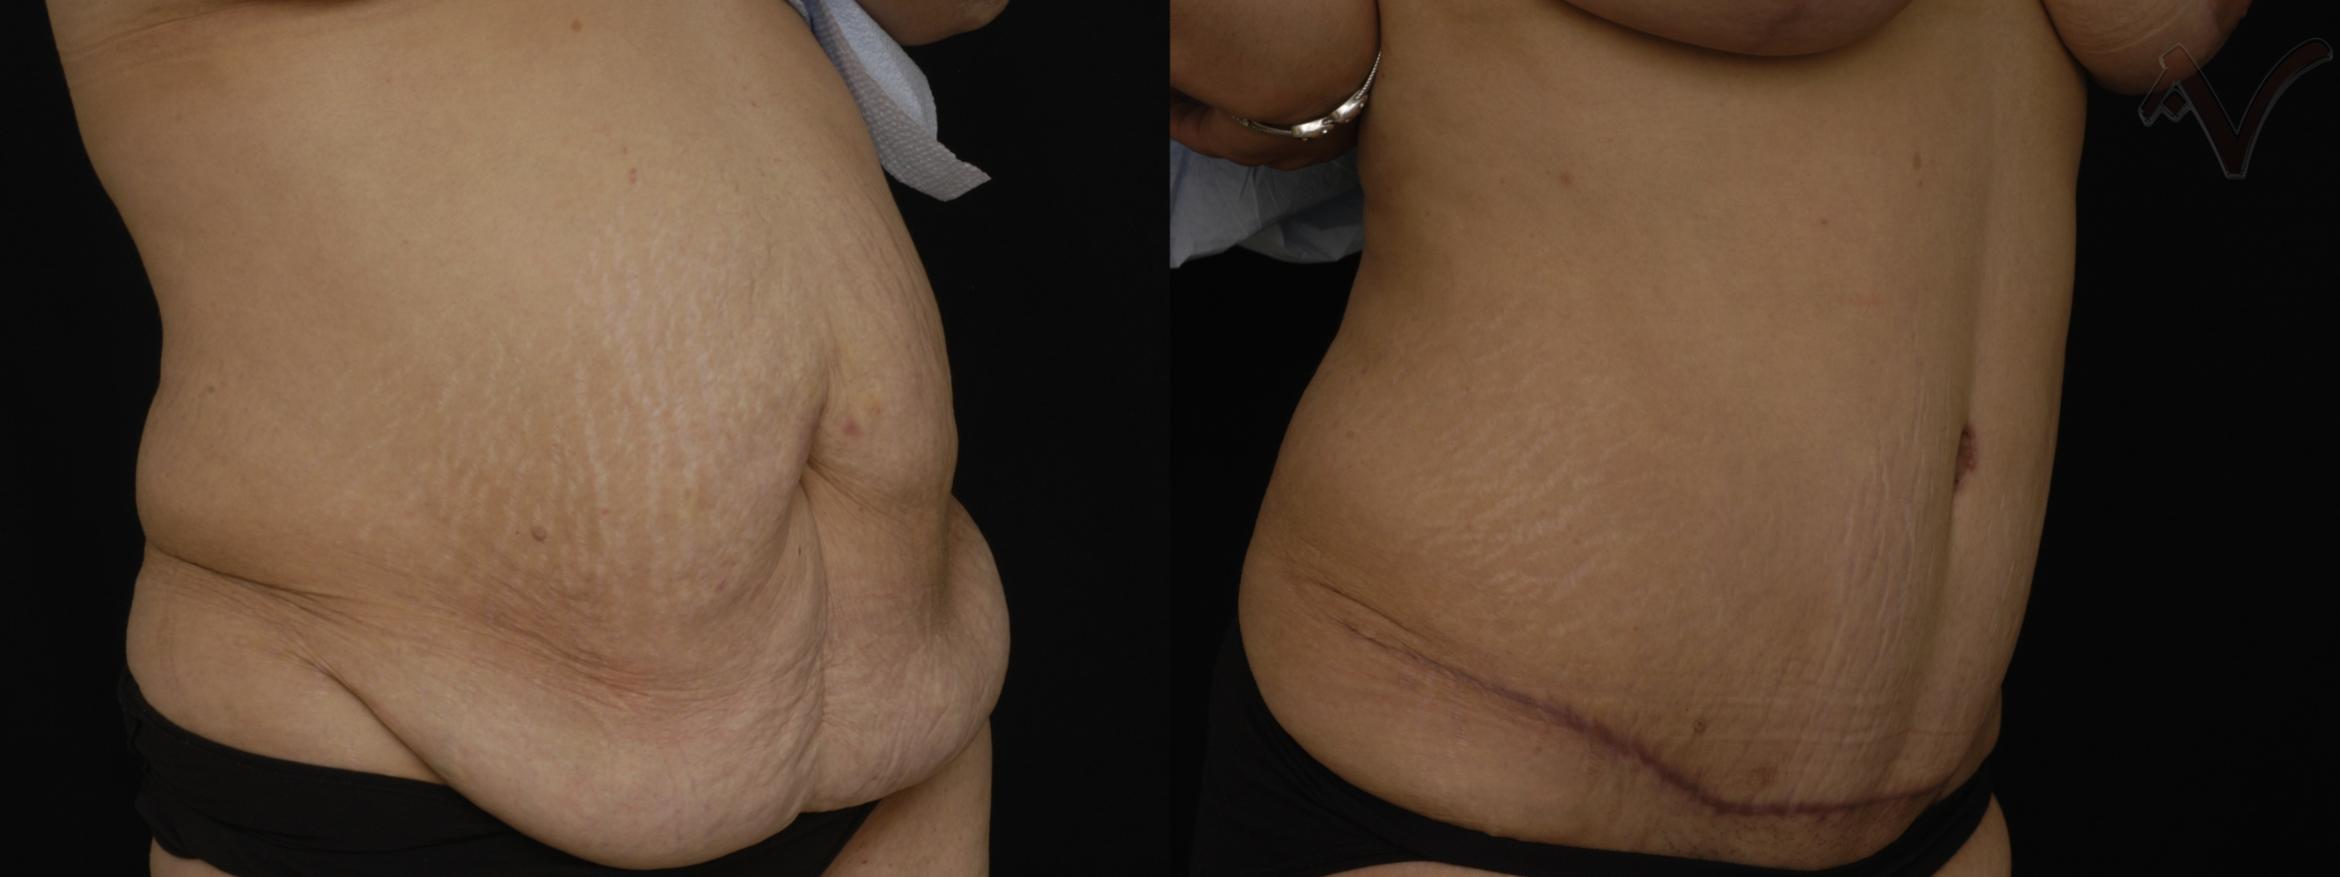 Tummy Tuck Before and After Pictures Case 201 | Los Angeles, CA | Armen  Vartany, MD, FACS: Plastic Surgery & Laser Center